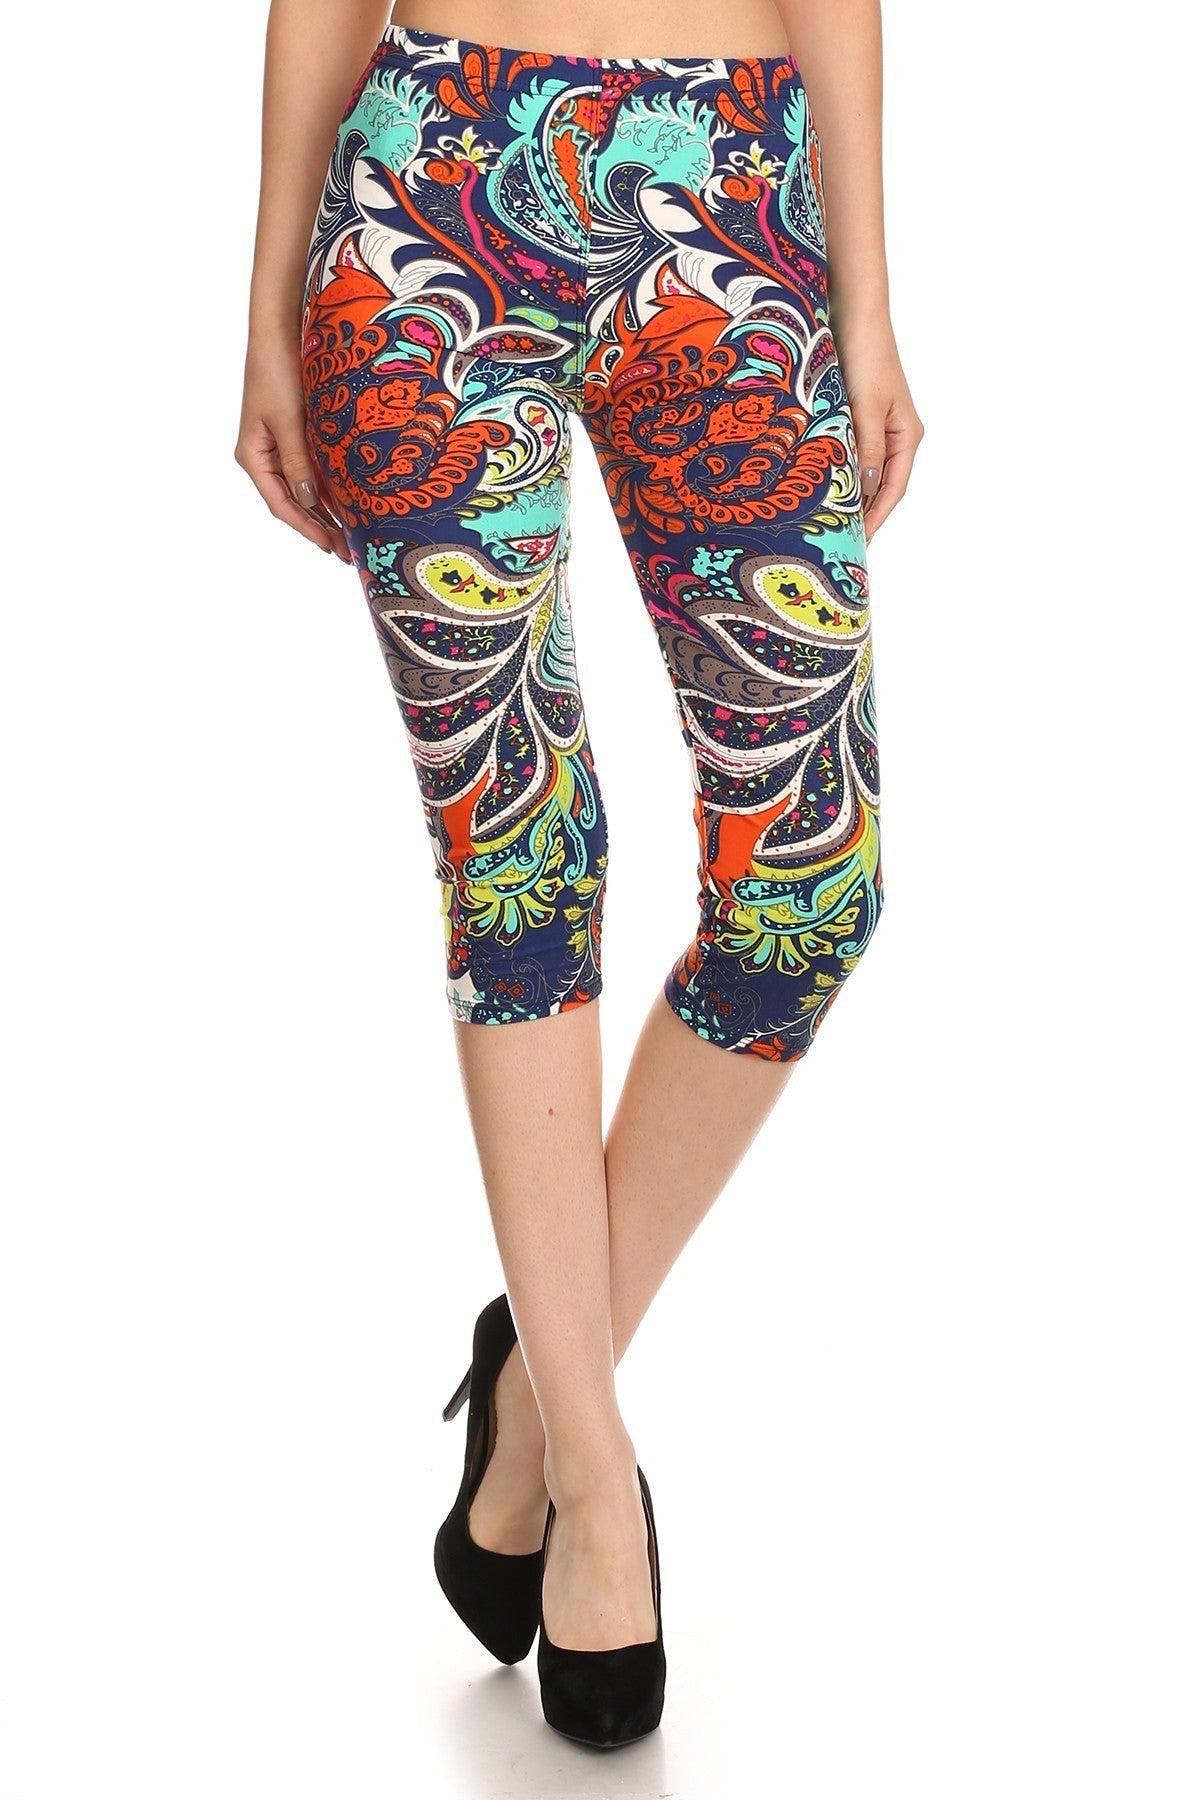 Multi-color Ornate Print Cropped Length Fitted Leggings With High Elastic Waist.-TOPS / DRESSES-[Adult]-[Female]-Multi-Blue Zone Planet